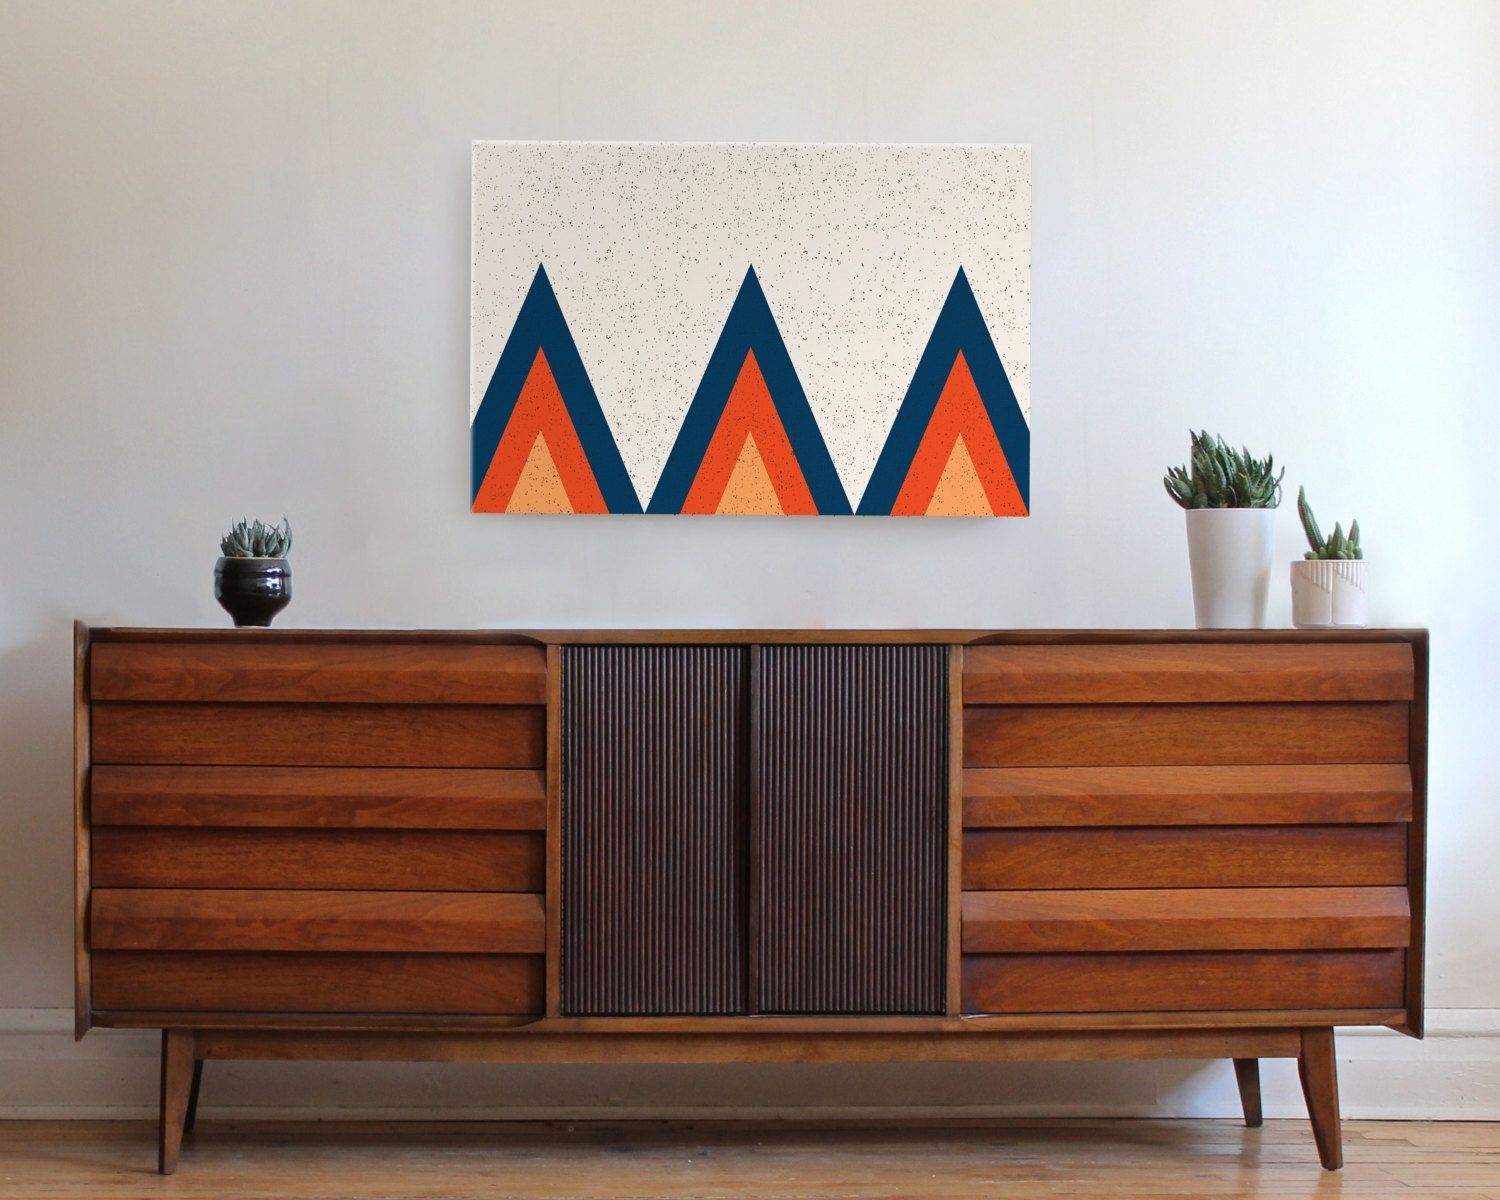 Best Mid Century Modern Wall Art : Andrews Living Arts – Photo With Most Popular Mid Century Wall Art (View 1 of 20)